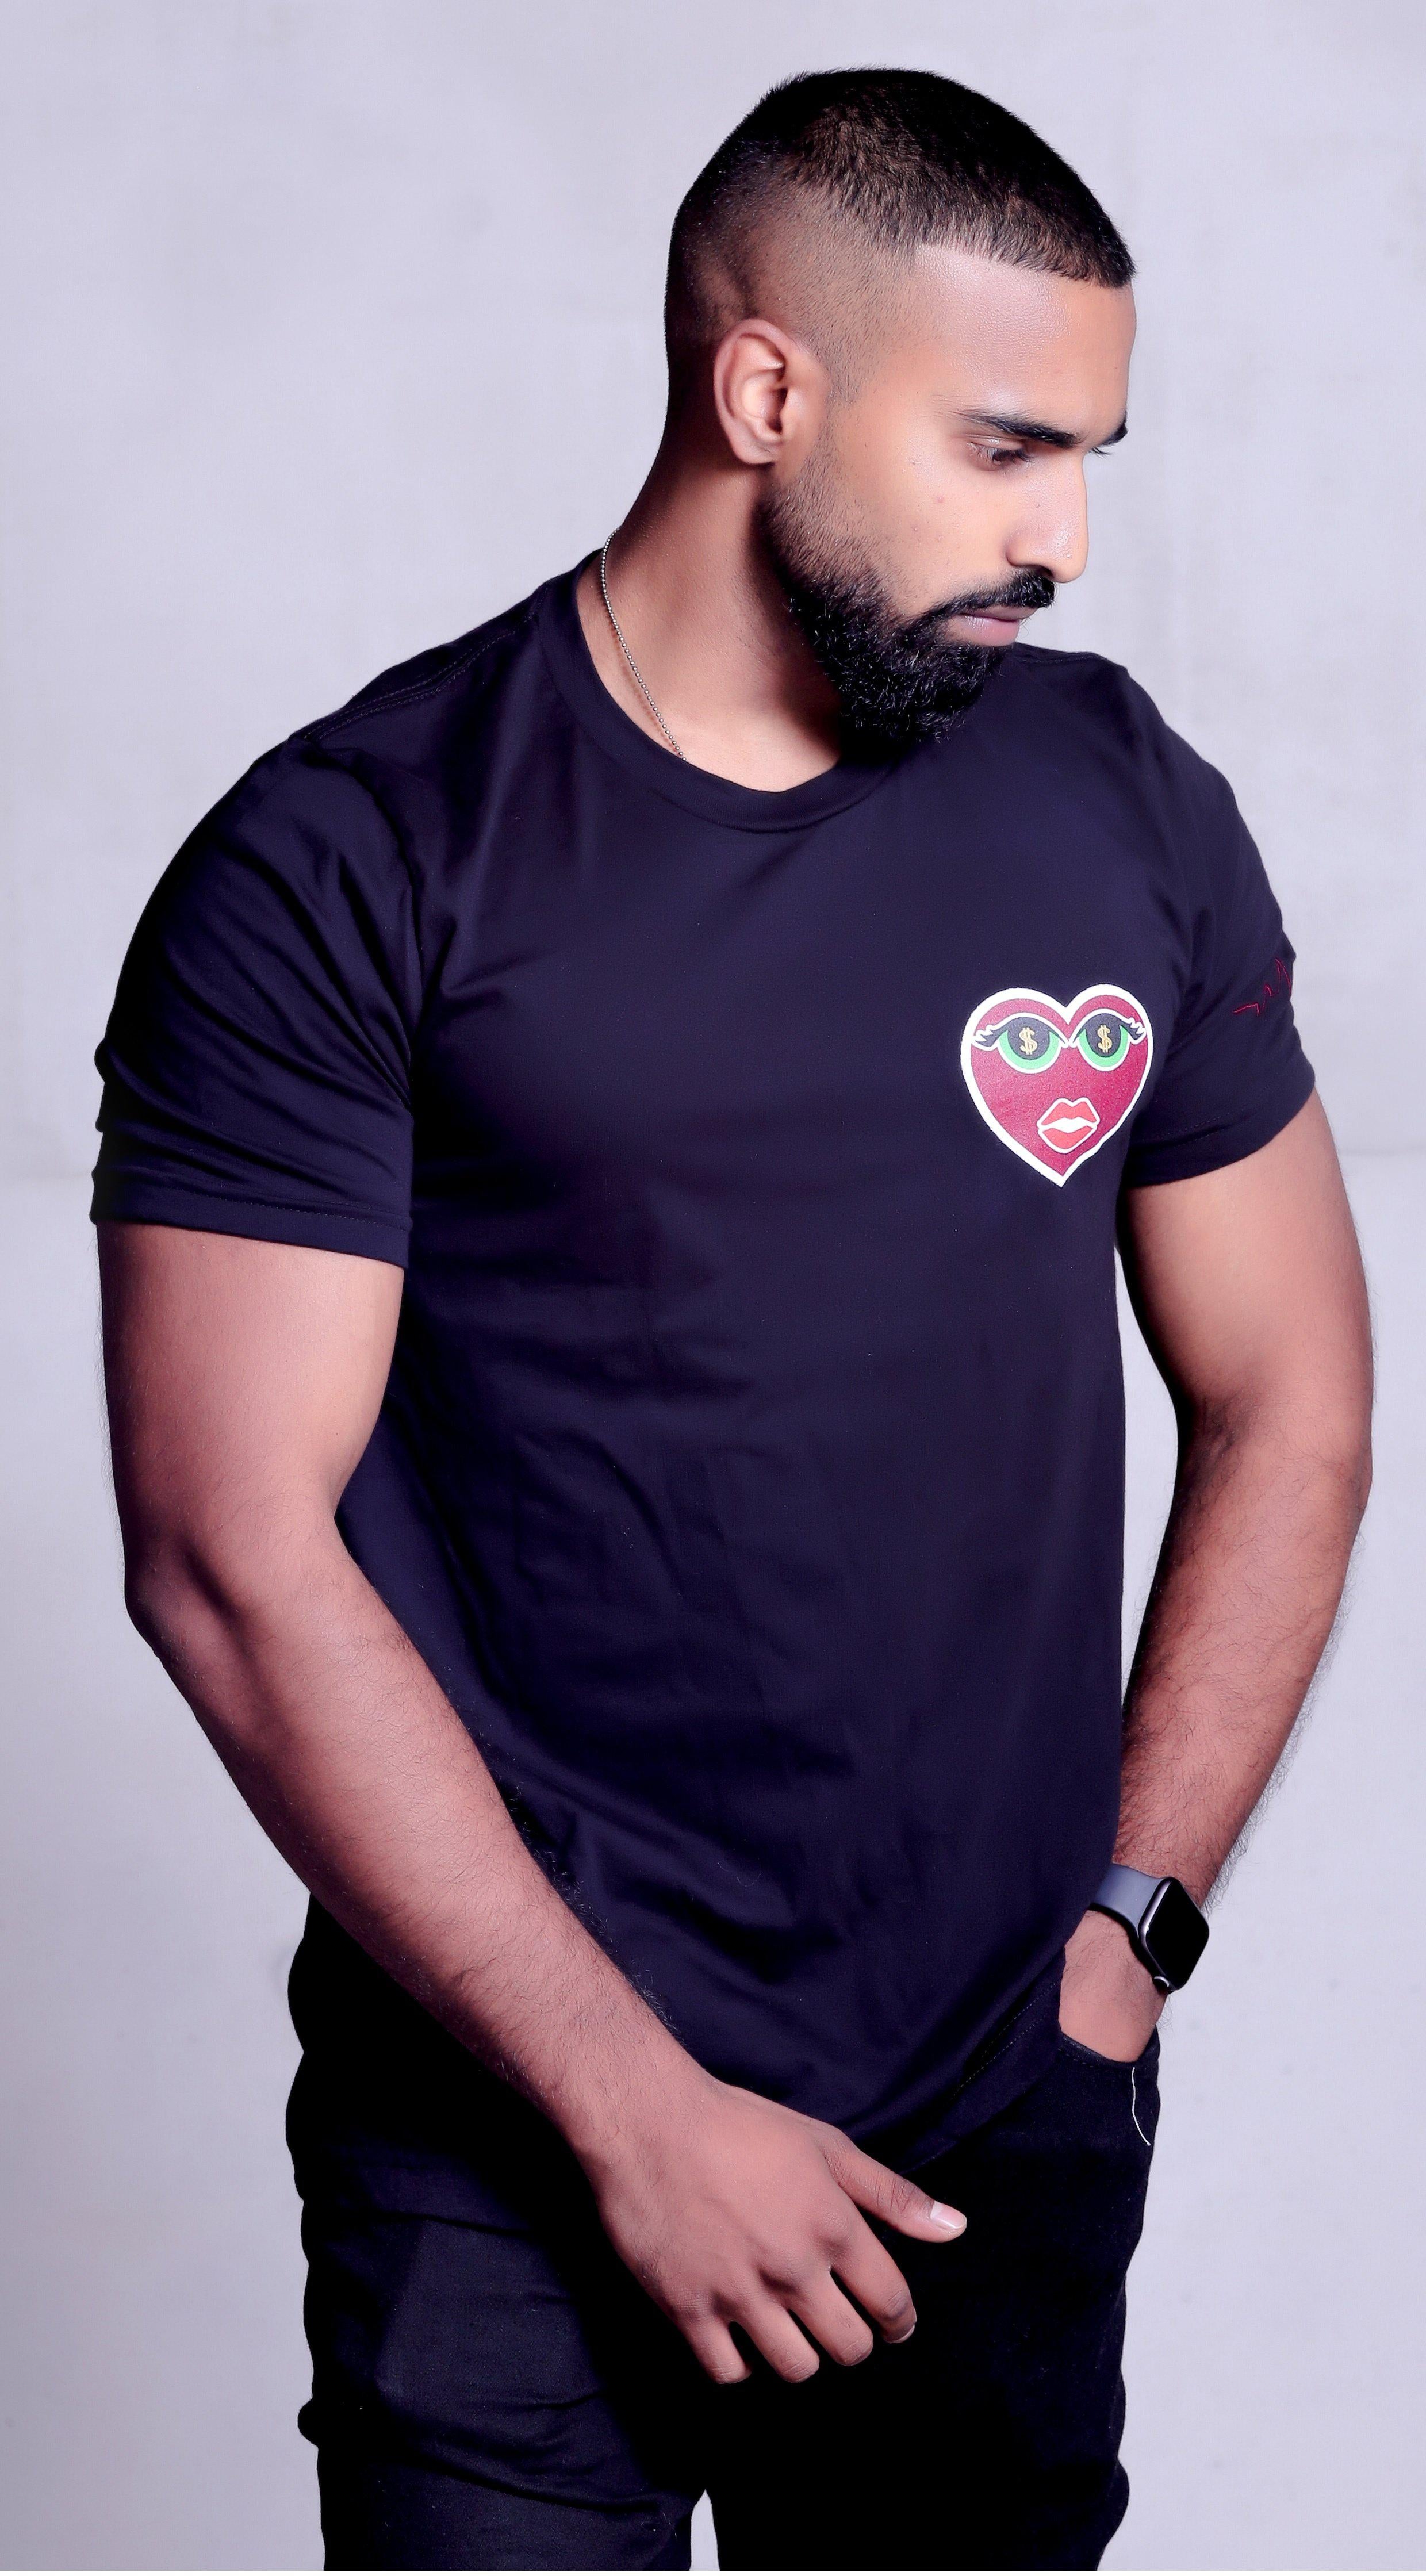 Drake look a like is modelling showing off his muscles wearing Unisex Money Eyes Black T-shirt